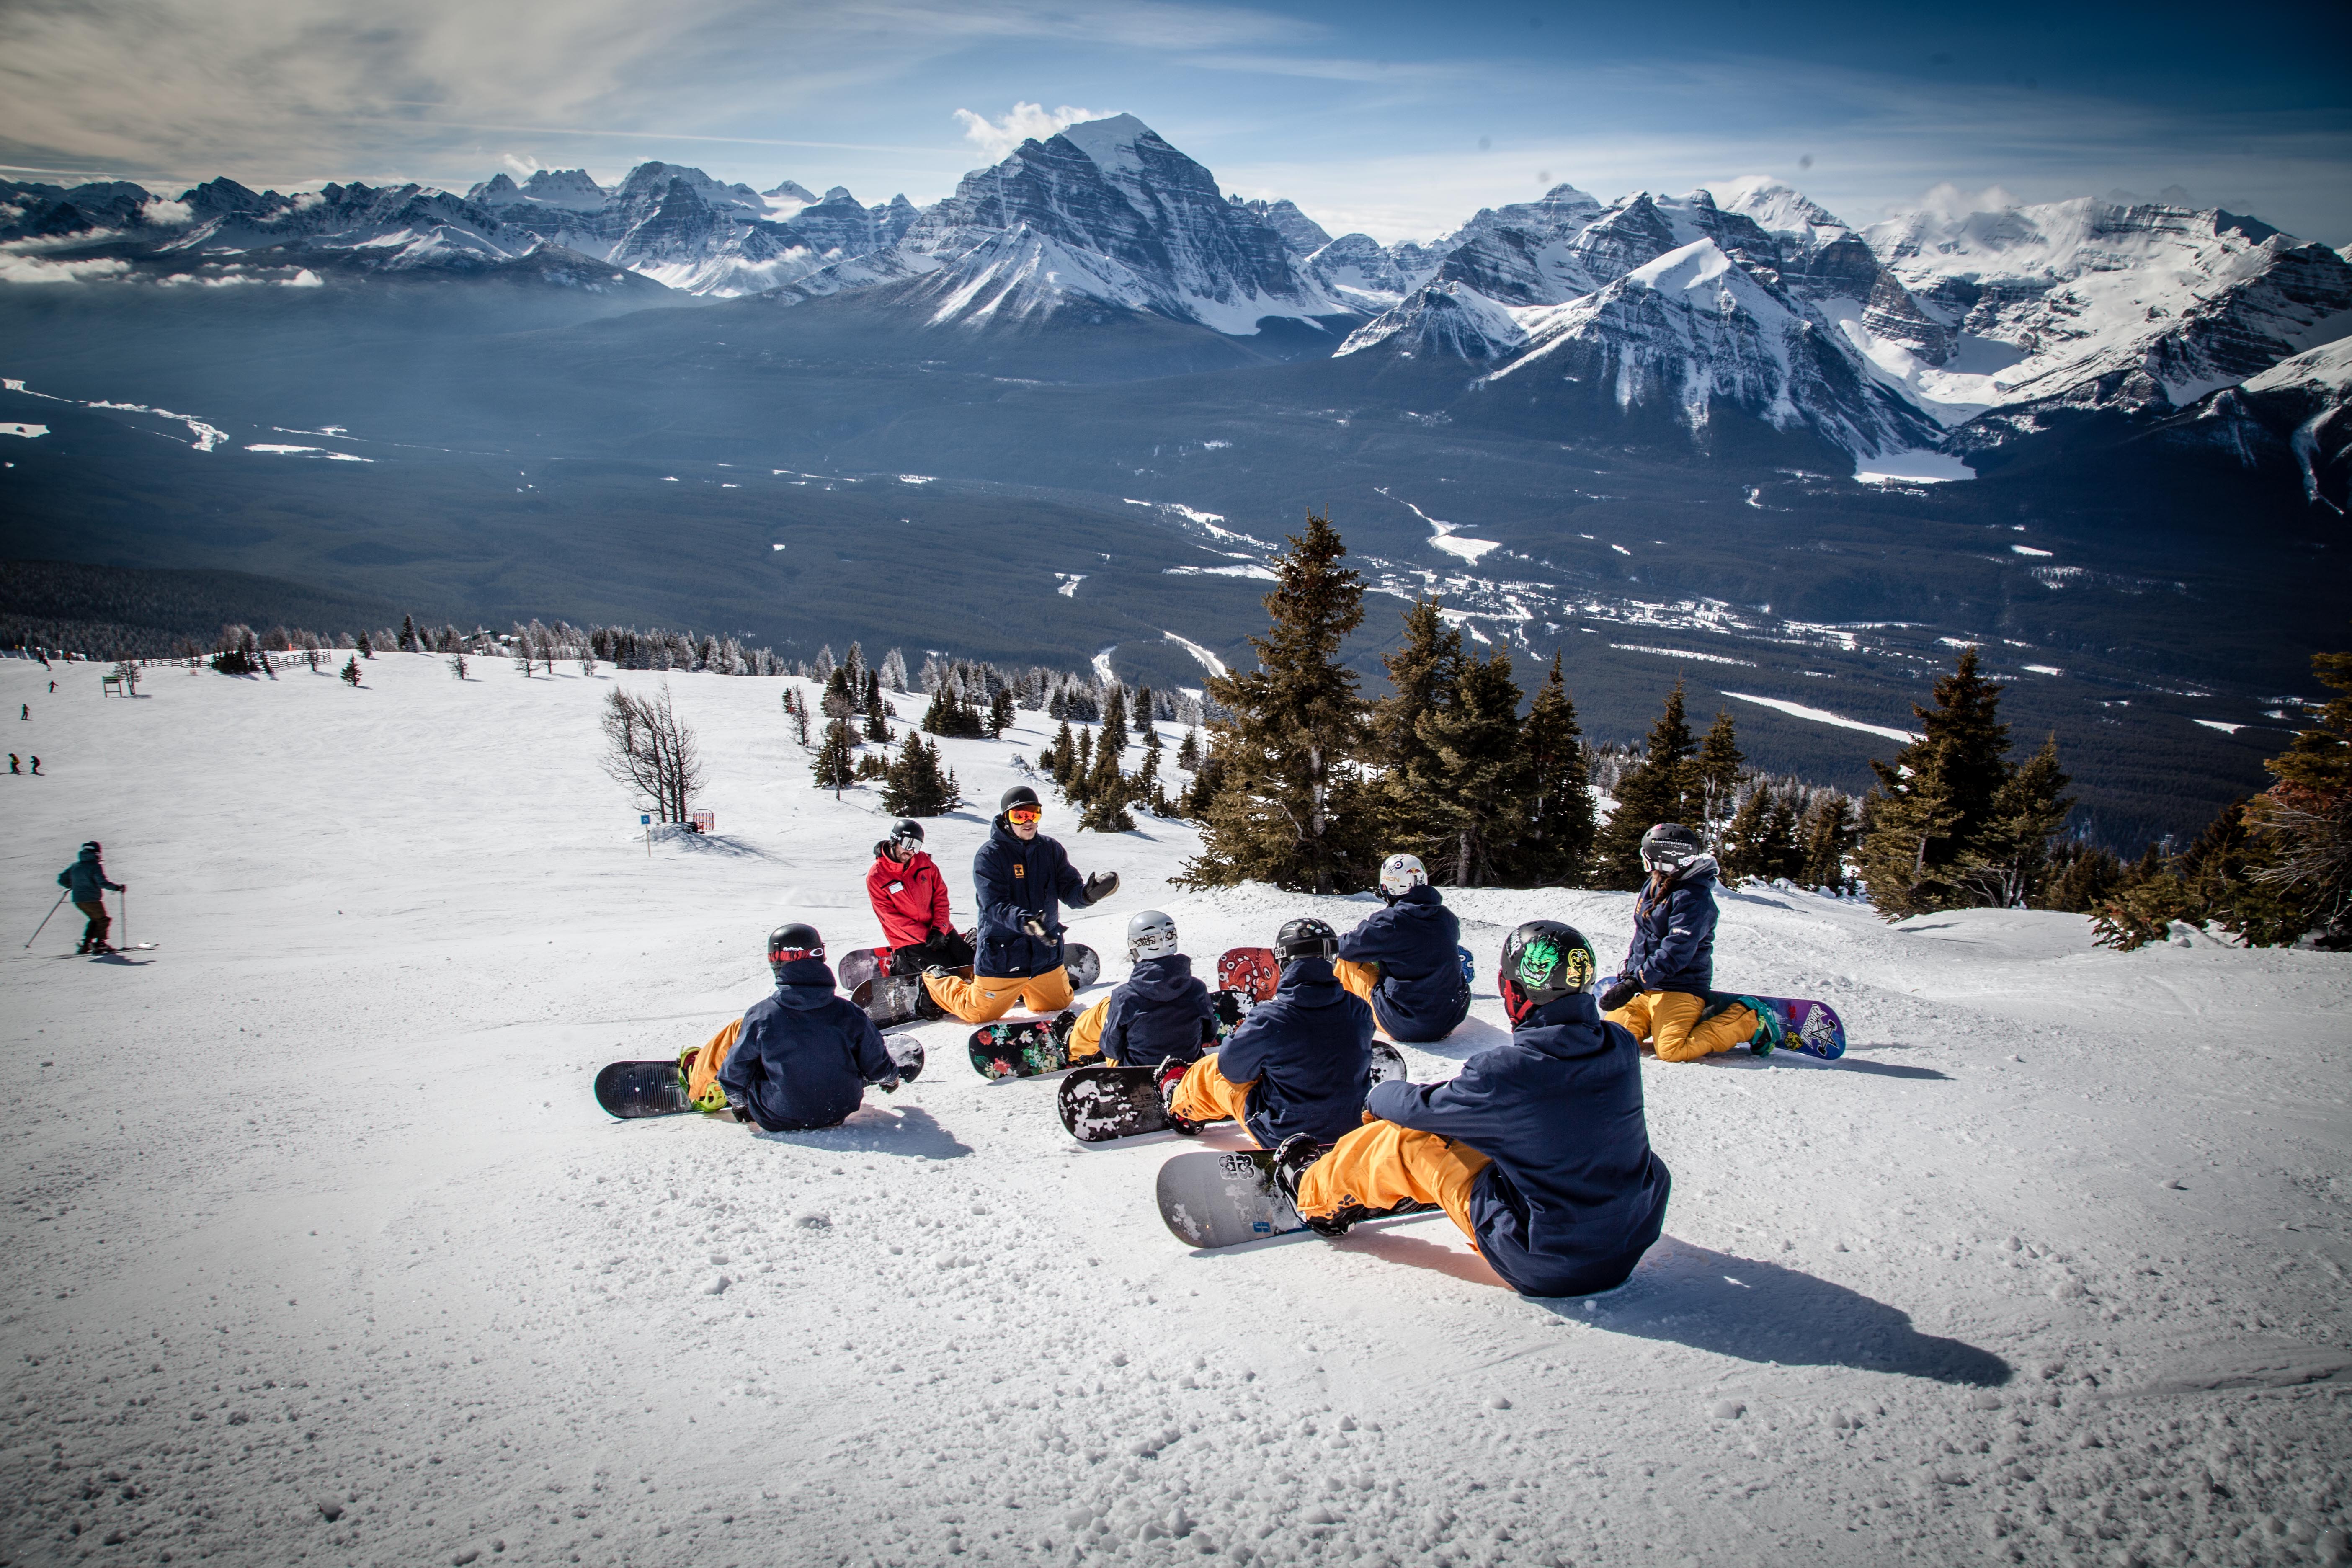 5 steps to become a snowboard instructor